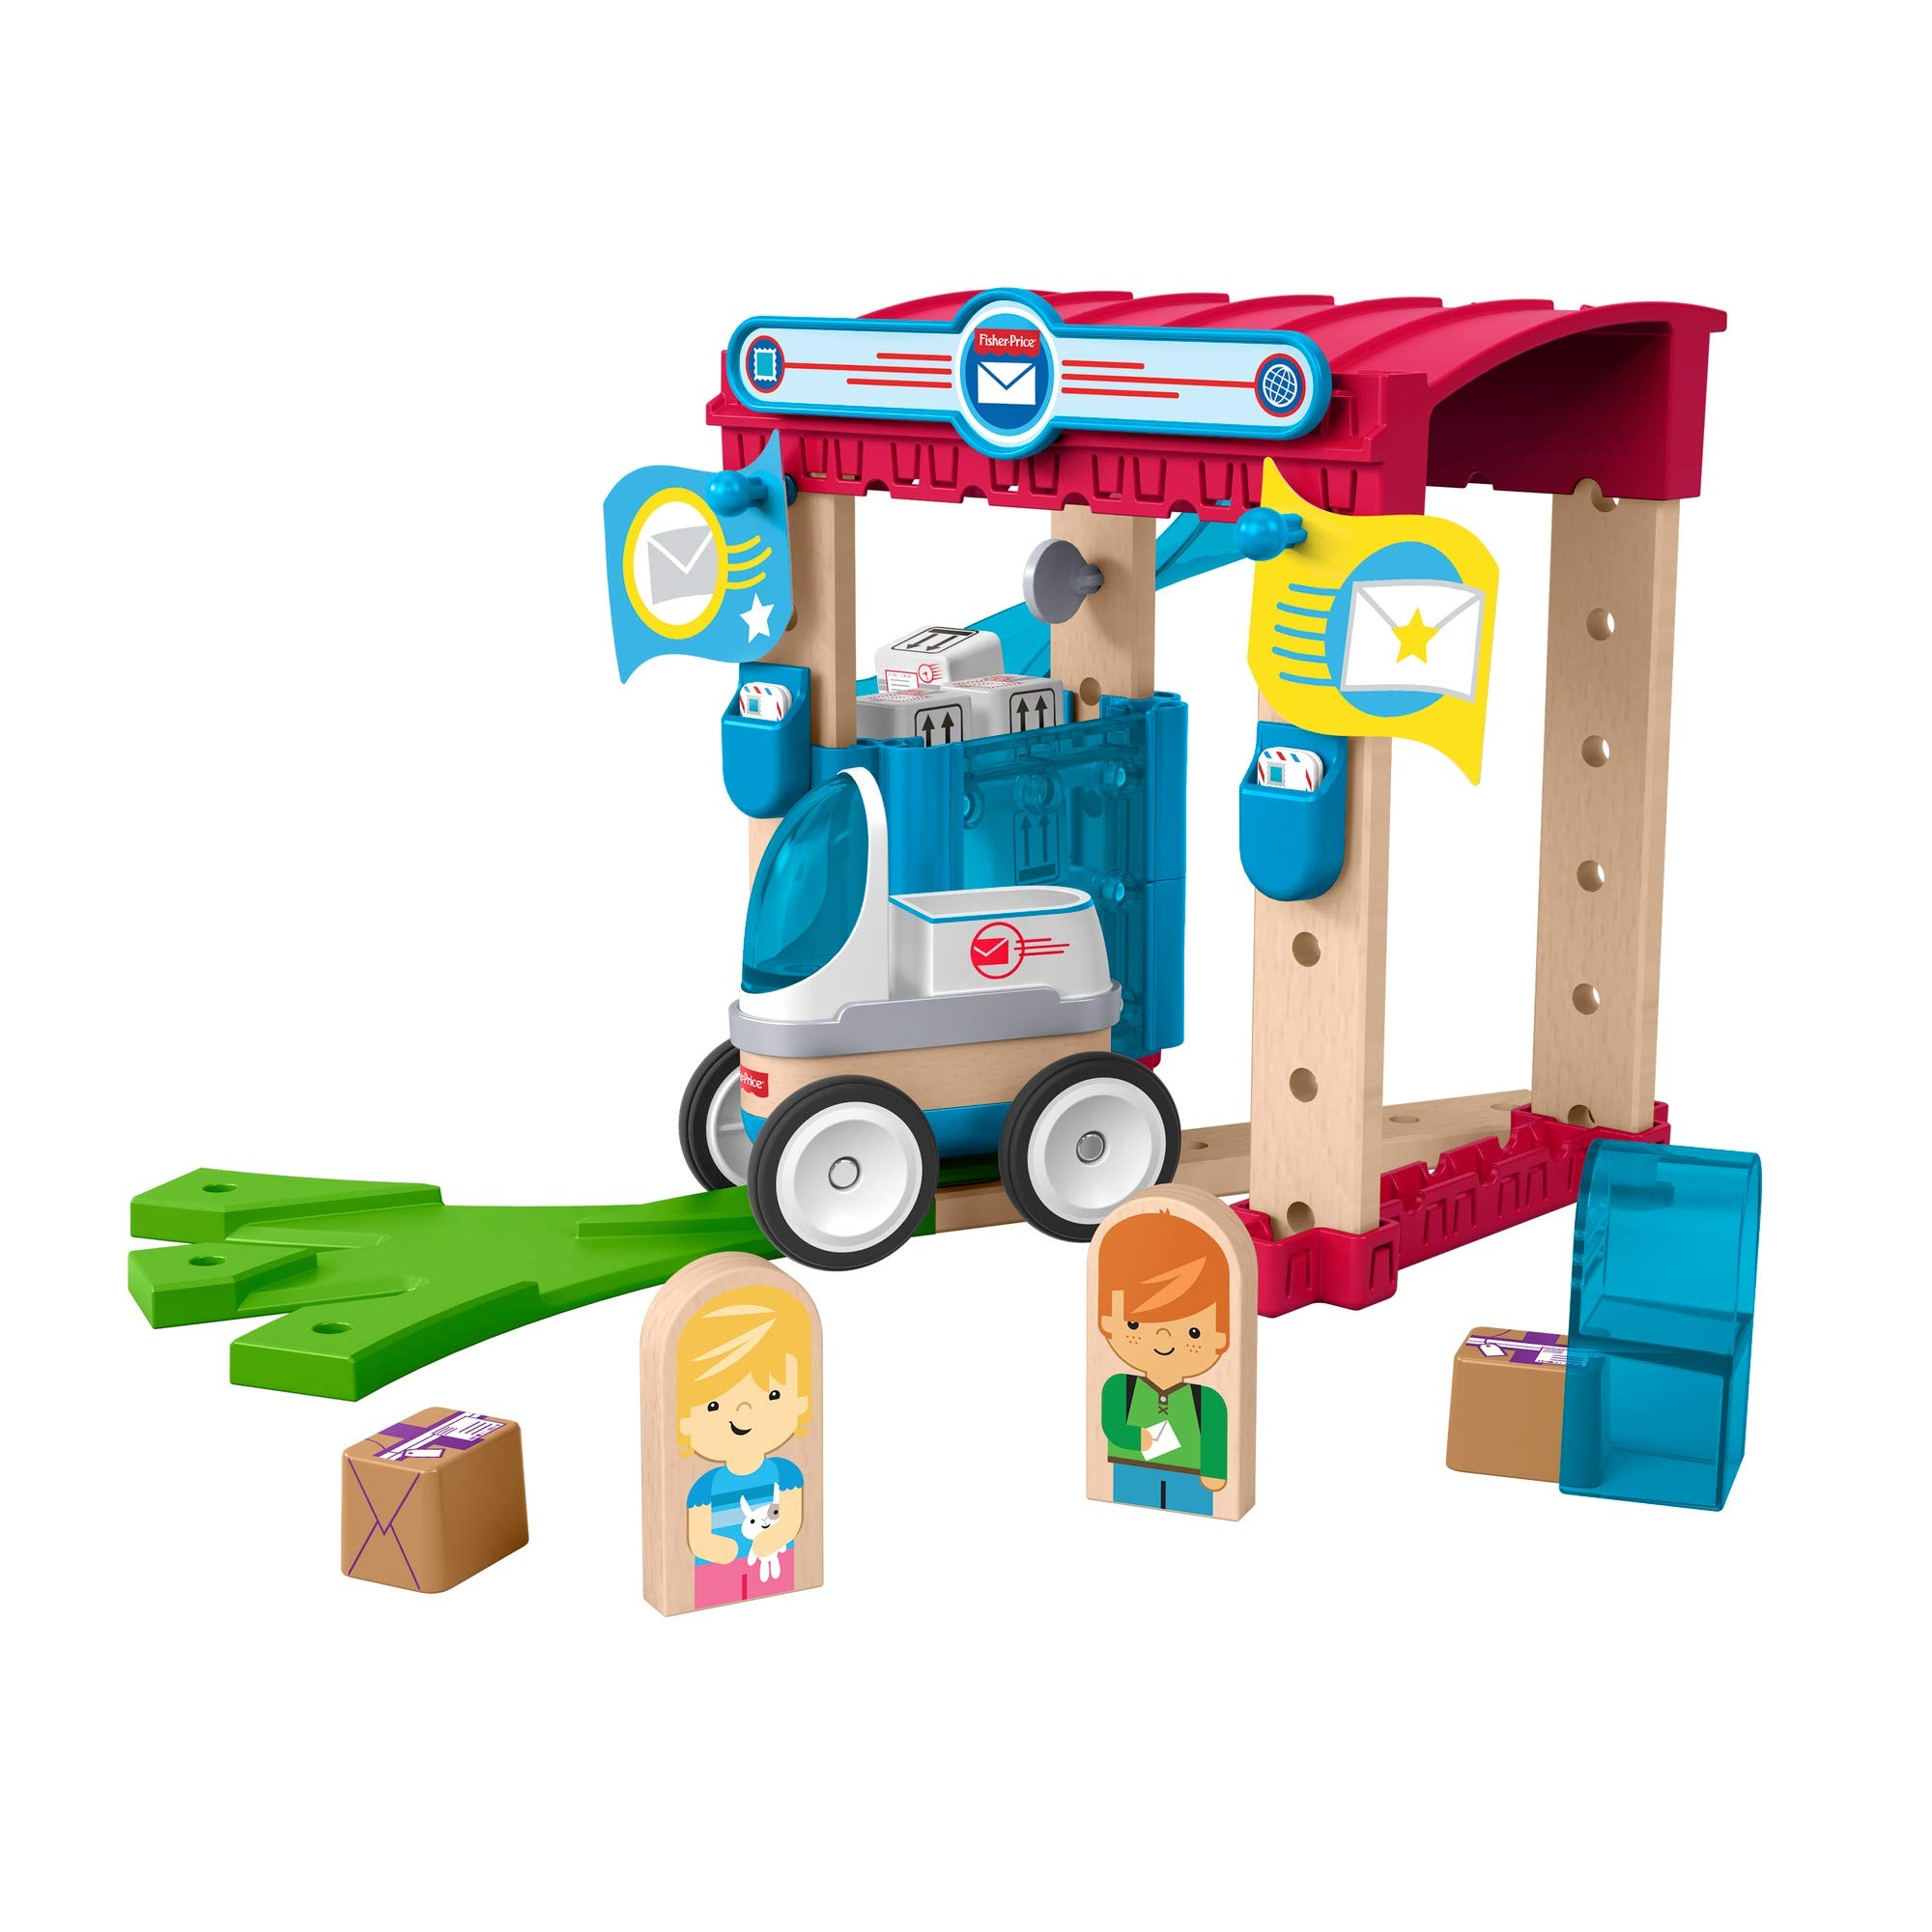 35-Piece Fisher-Price Wonder Makers Design System Special Delivery Depot Playset $11.44 + Free Shipping w/ Prime or on $35+